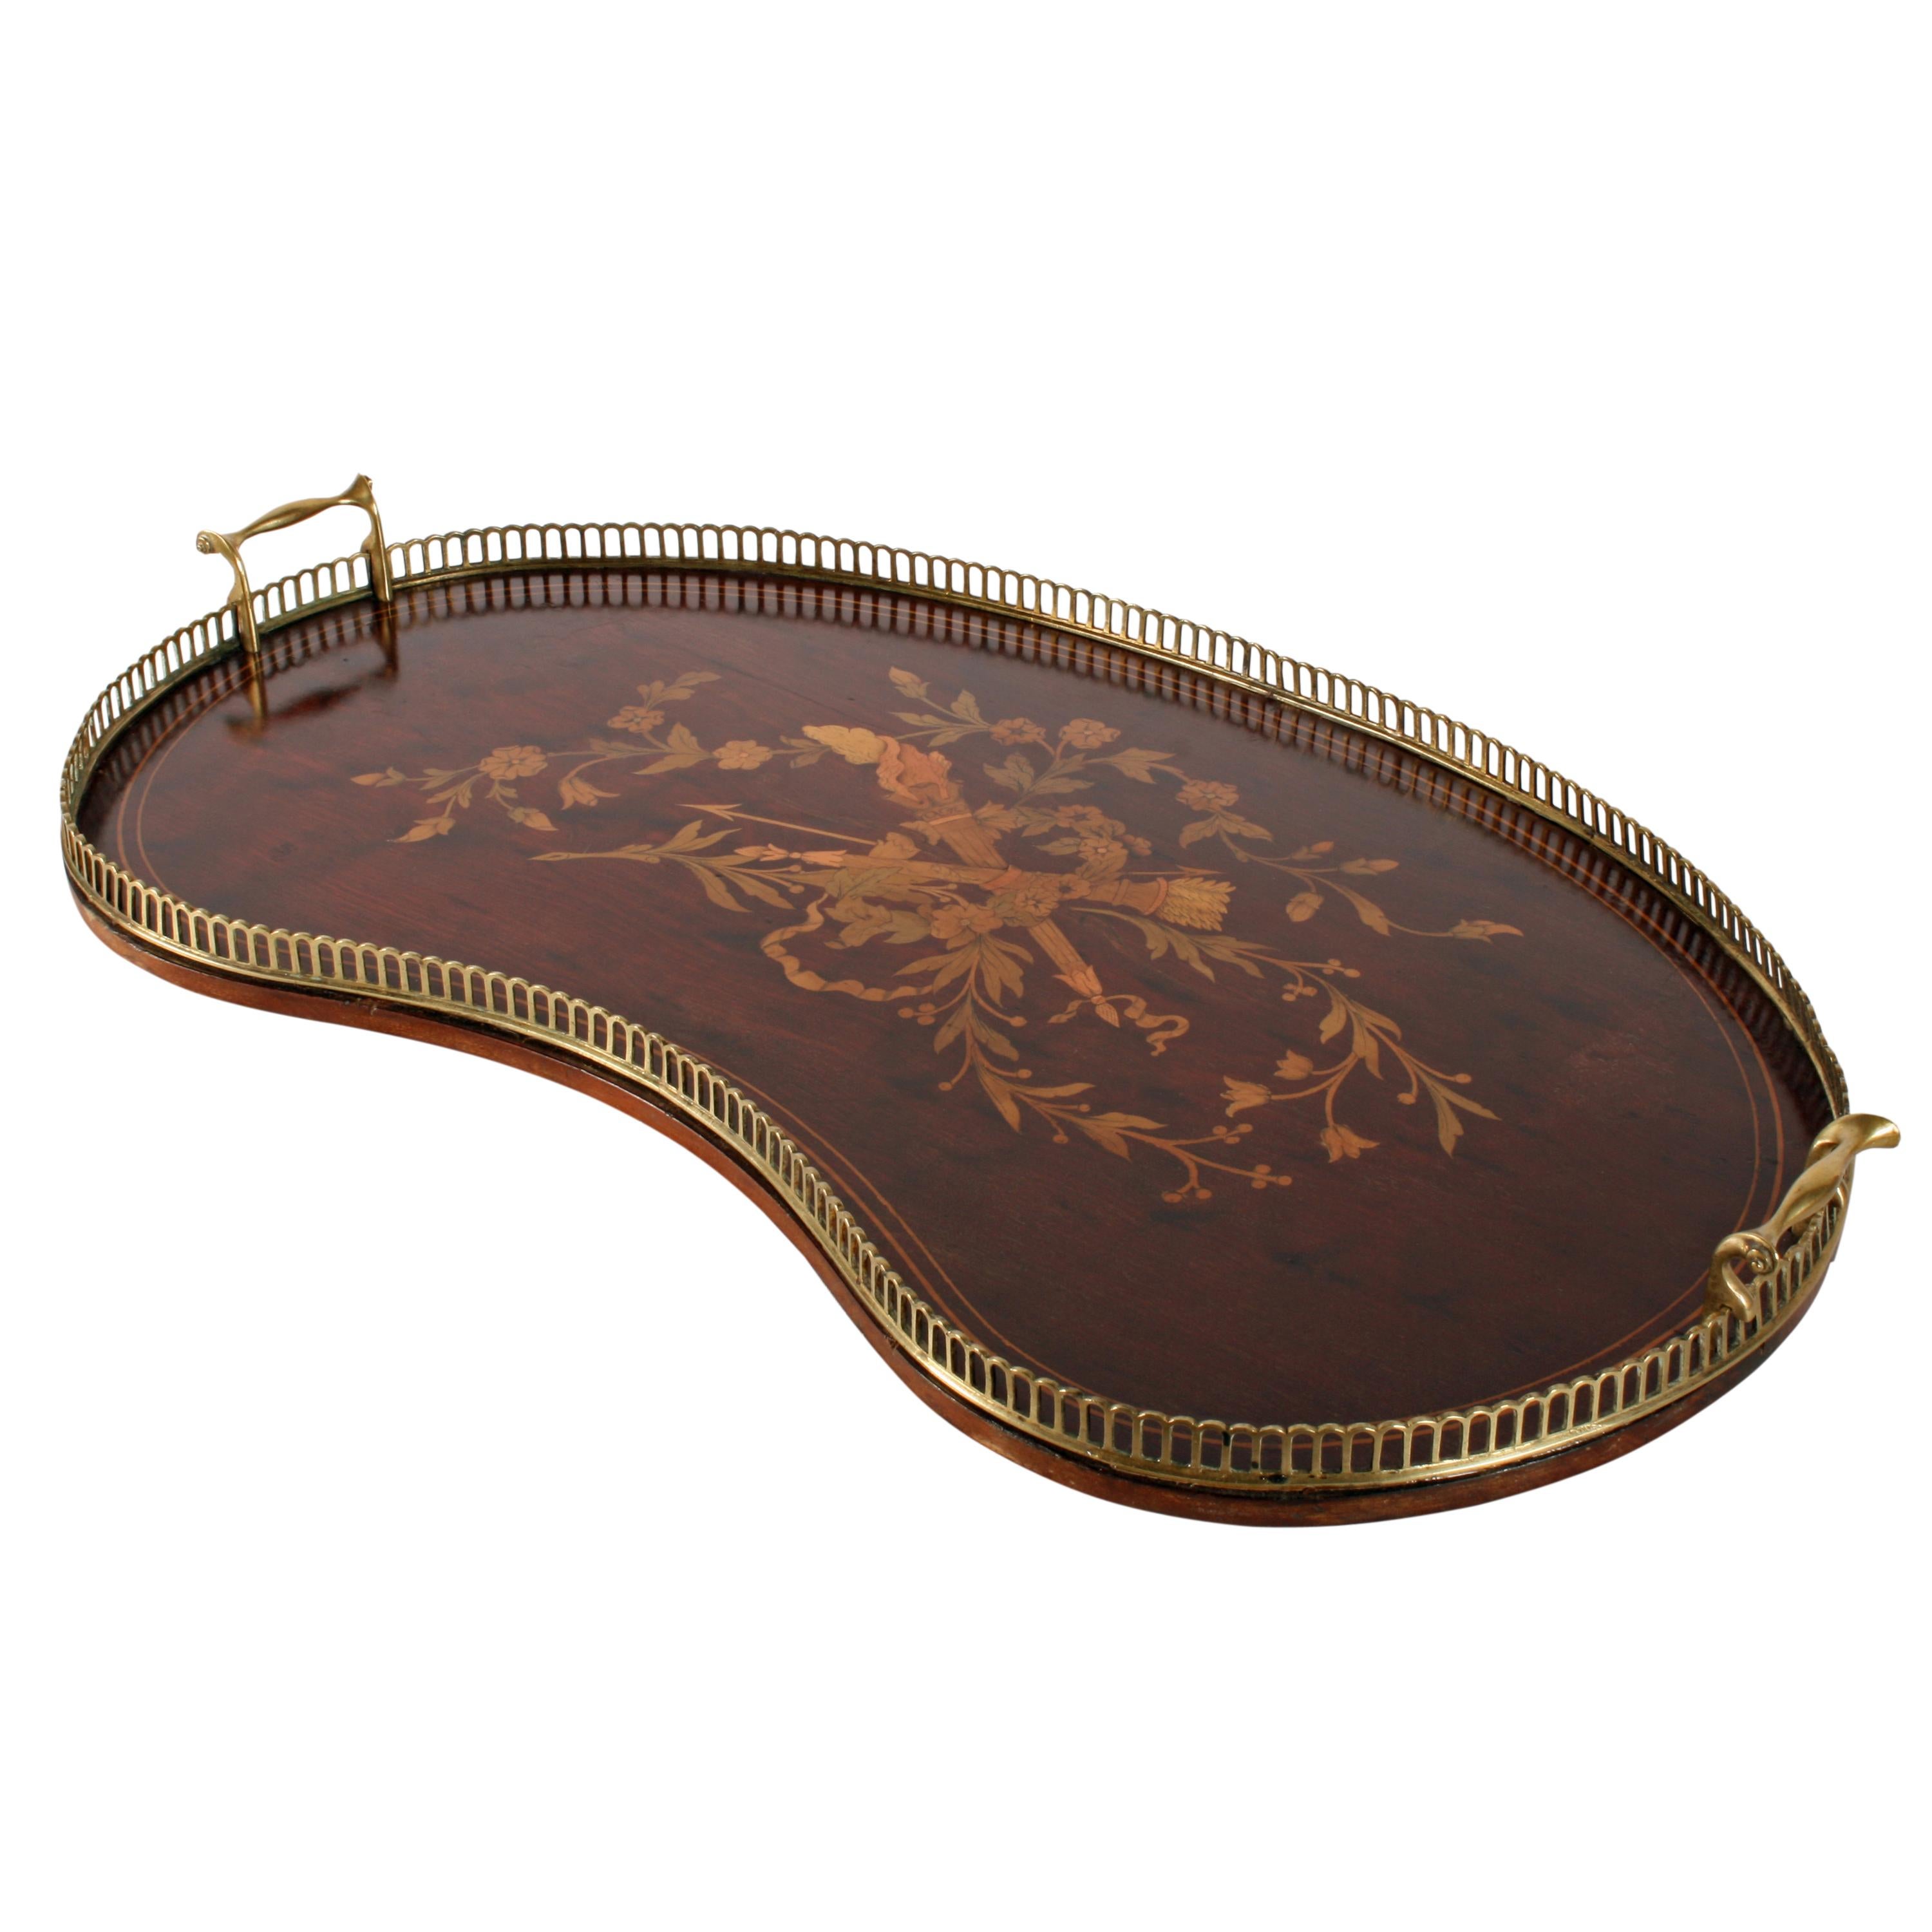 A late 19th century mahogany kidney shaped tray.

The tray is profusely marquetry inlaid in the centre and box wood line inlaid.

The tray has a pierced brass gallery to the edge with shaped brass carrying handles.

The tray is made from a